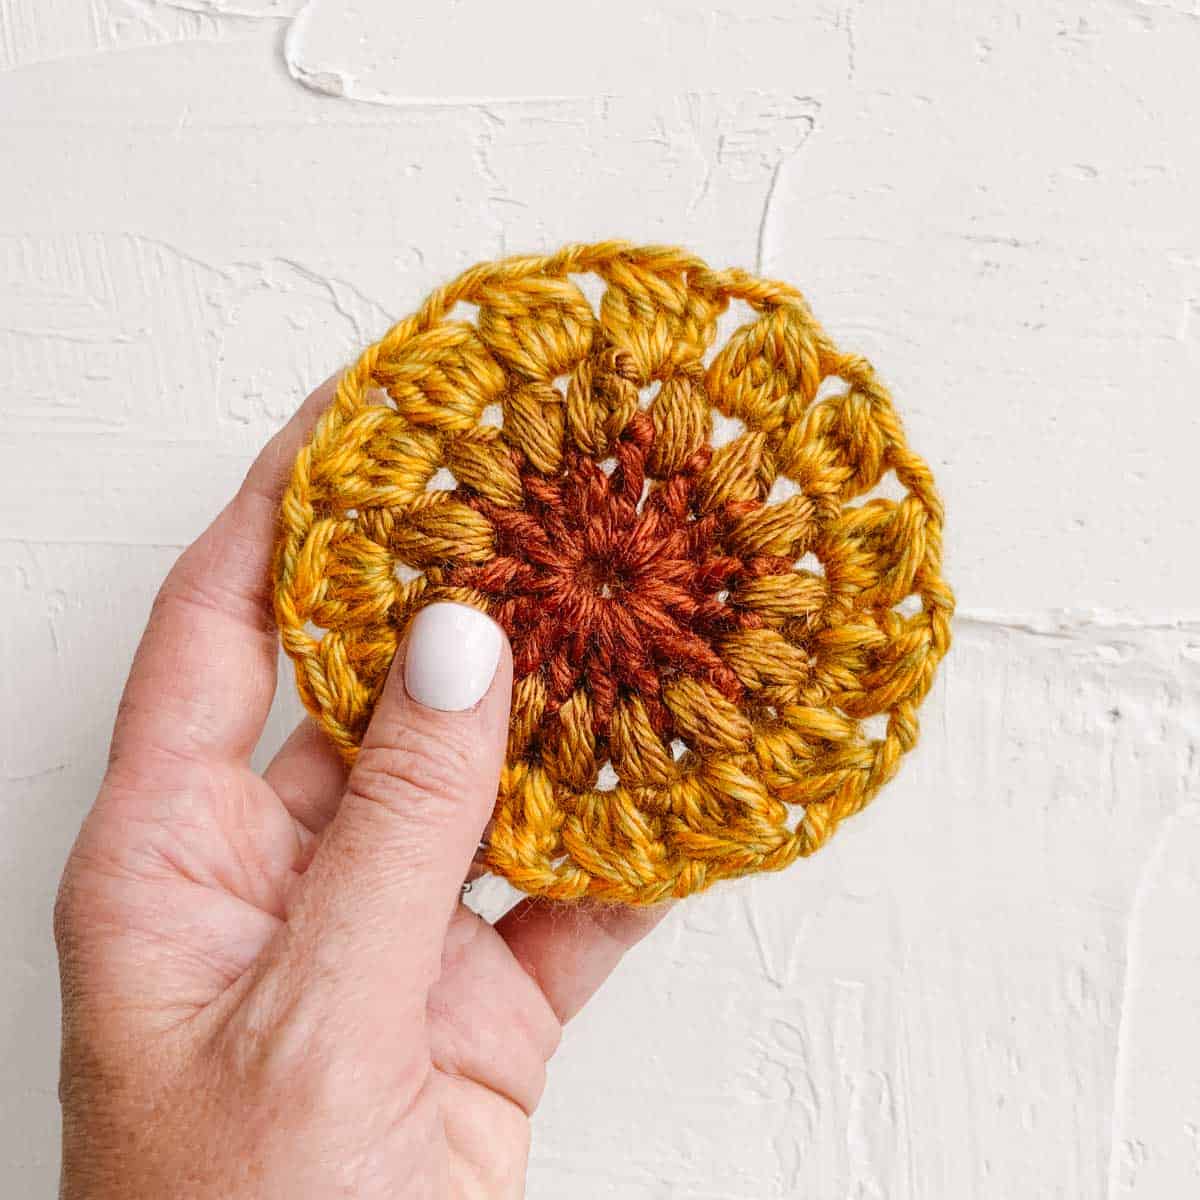 A crochet sunflower circle made with orange and yellow yarn.